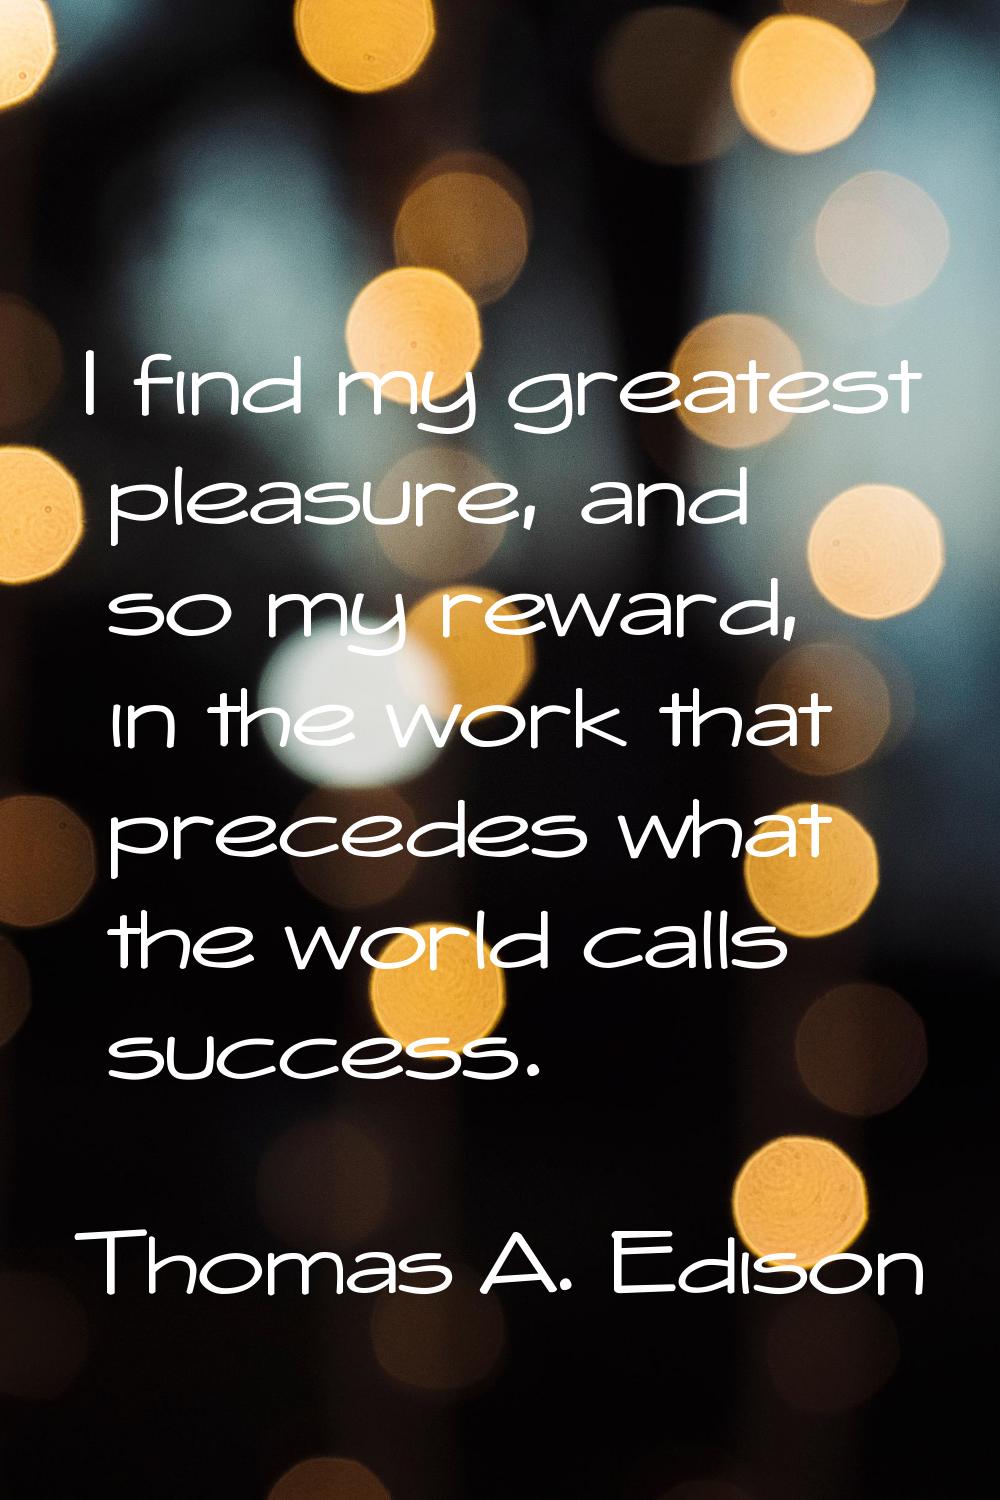 I find my greatest pleasure, and so my reward, in the work that precedes what the world calls succe